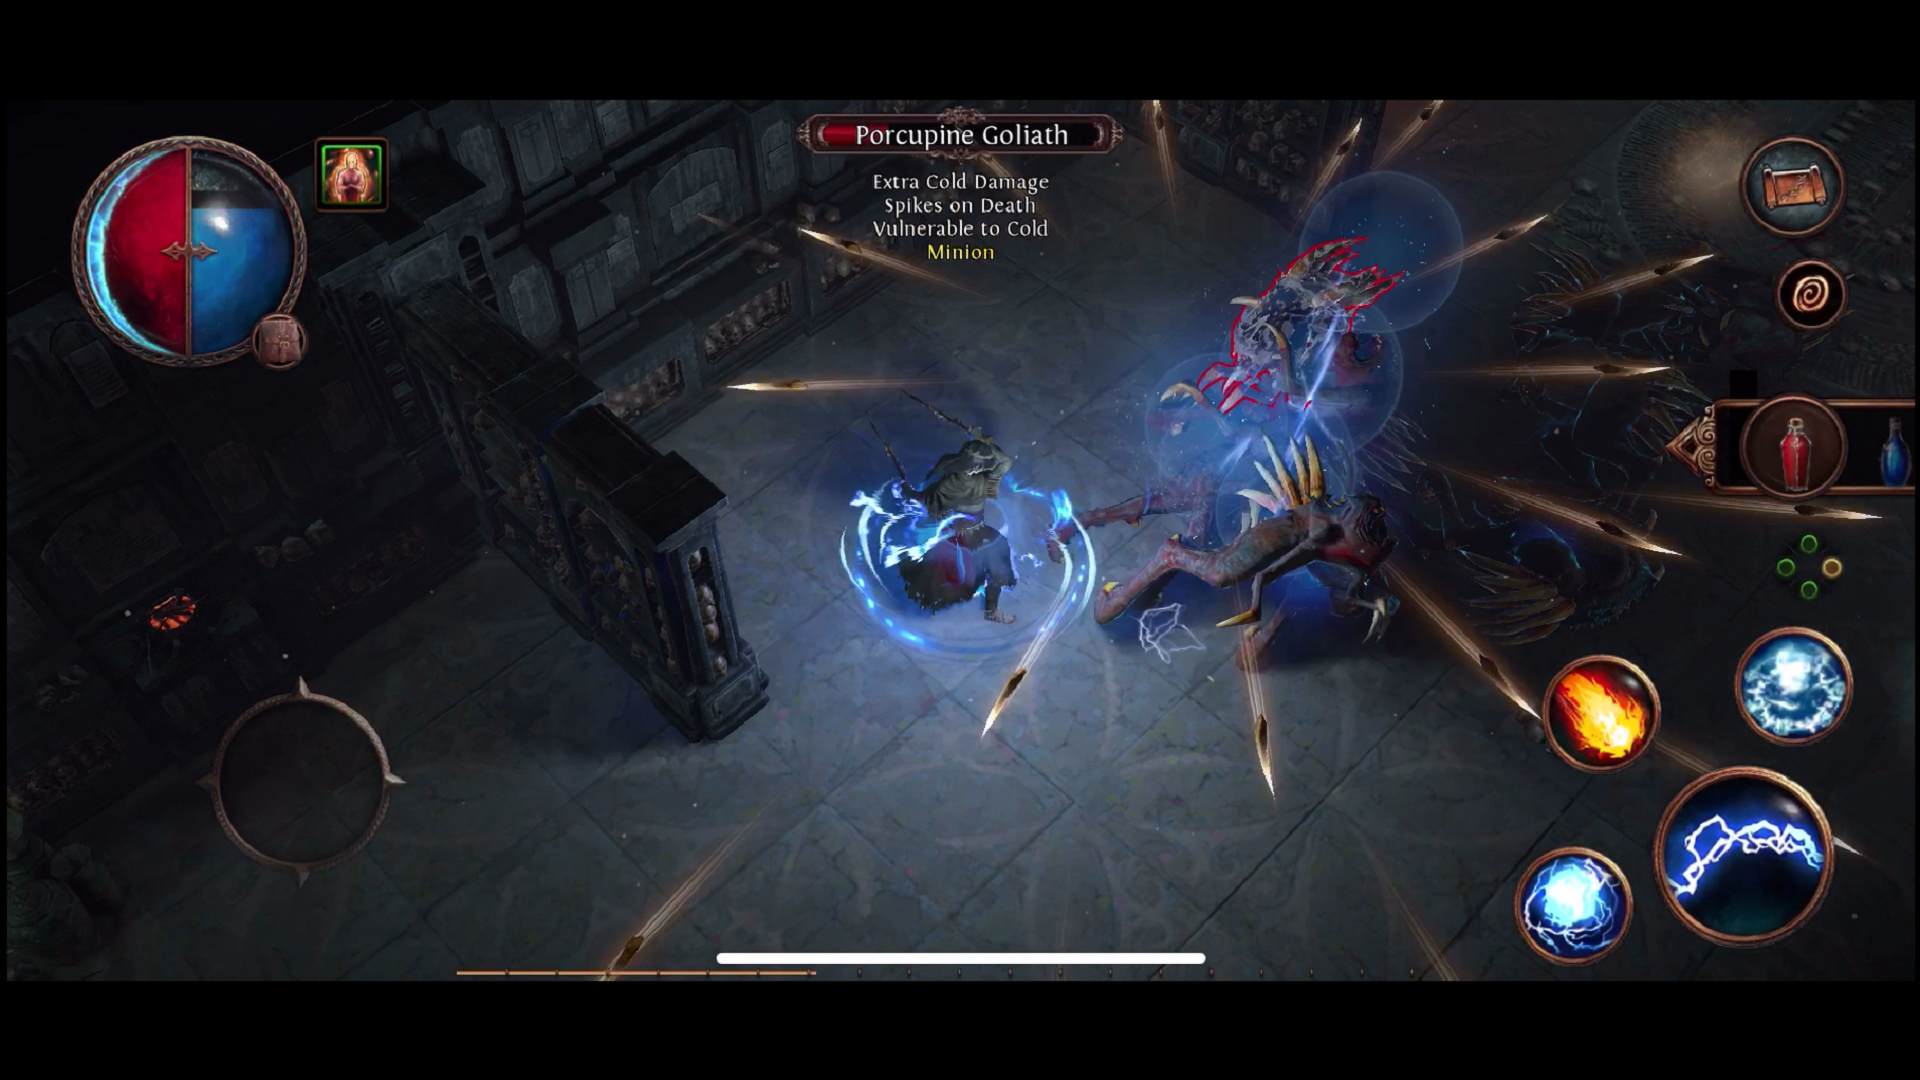 Screenshot 1 of Path of Exile Mobile Games 